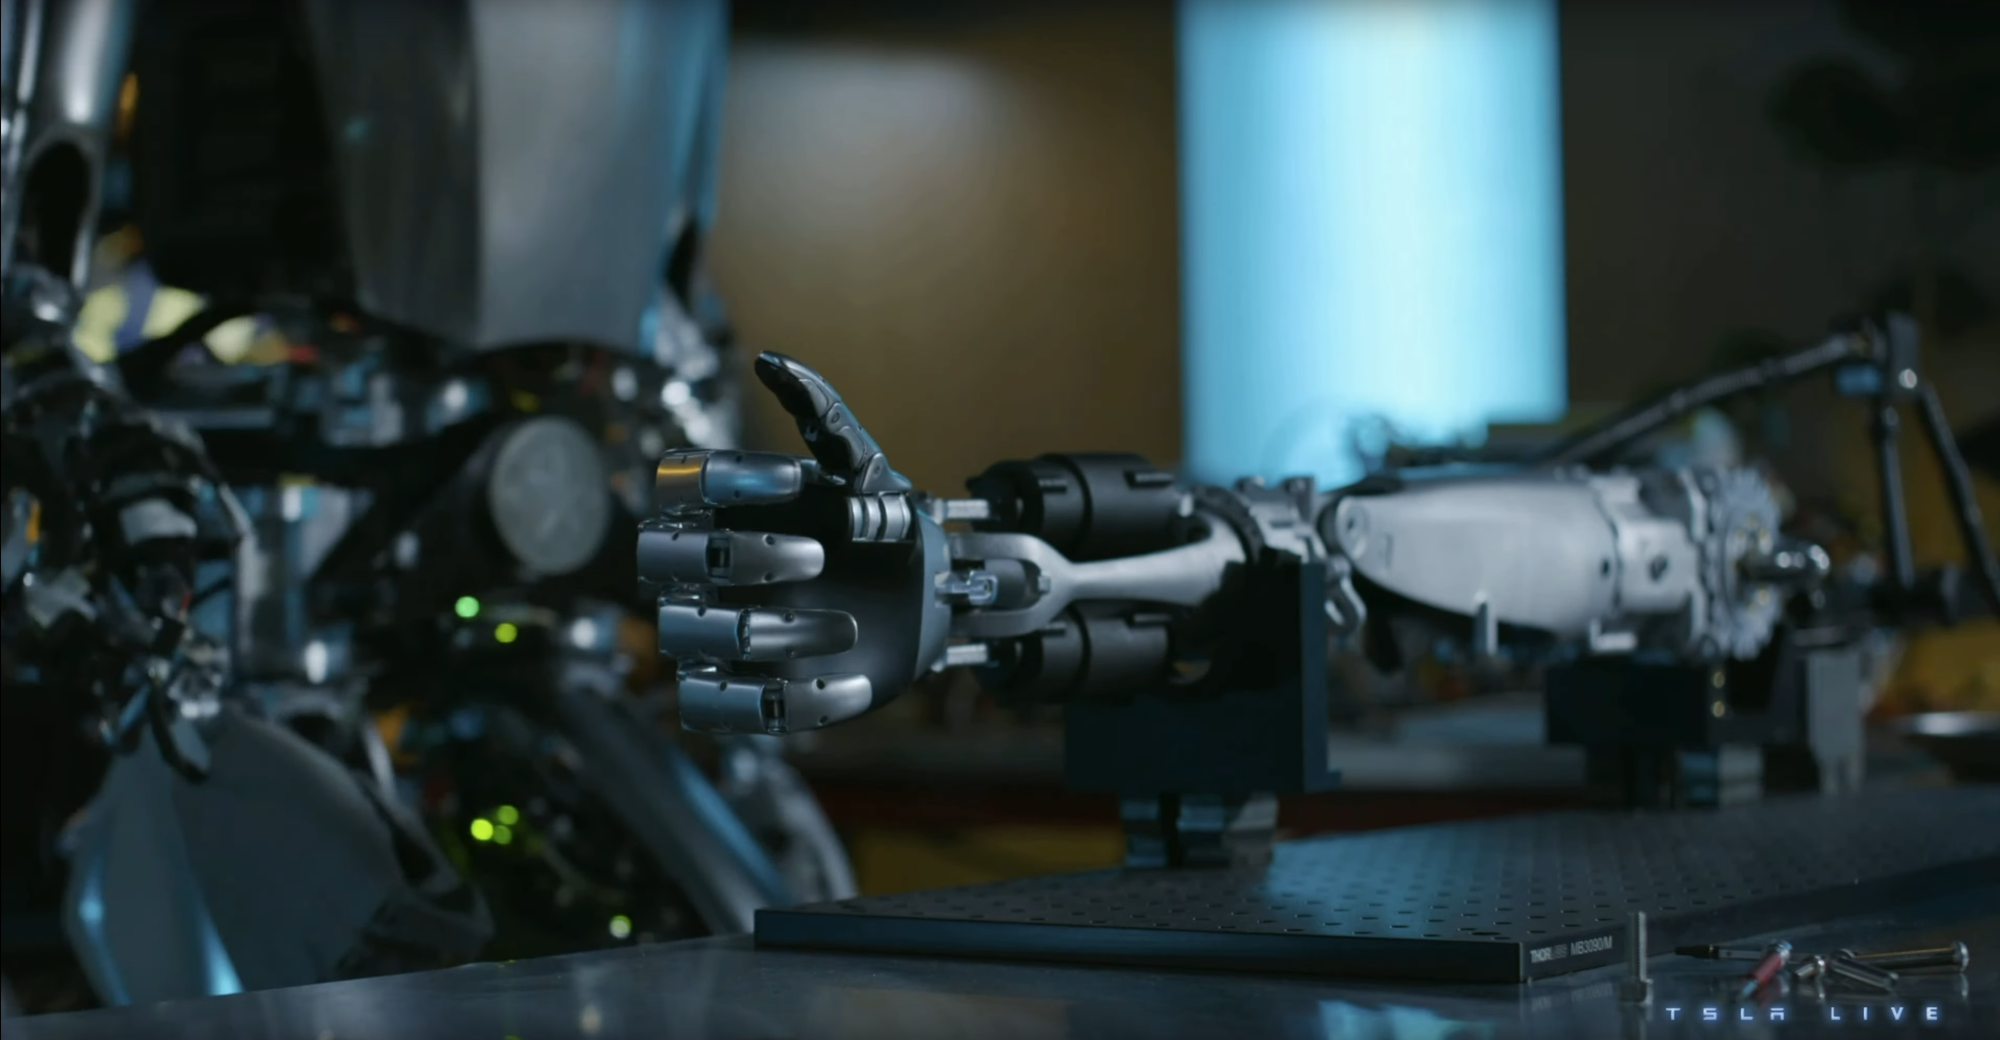 Screenshot of a humanoid robot arm from Tesla 2023 Investor Day